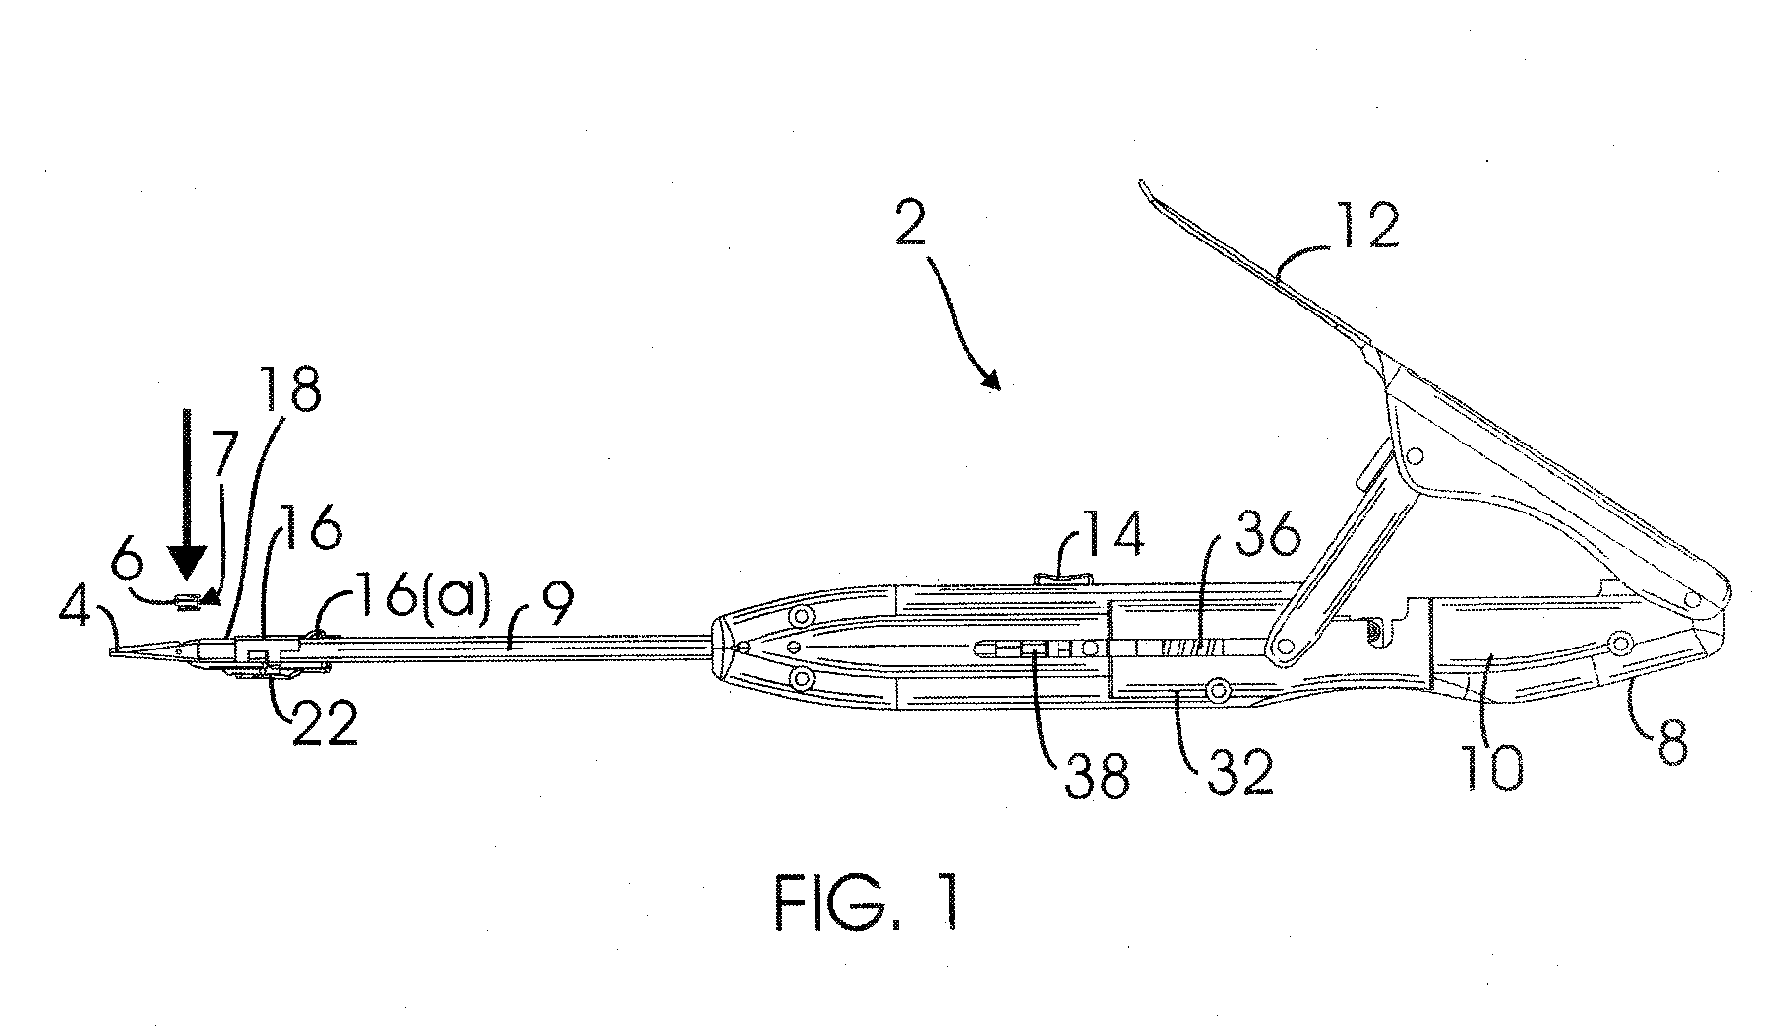 Apparatus and methods for delivering fasteners during valve replacement